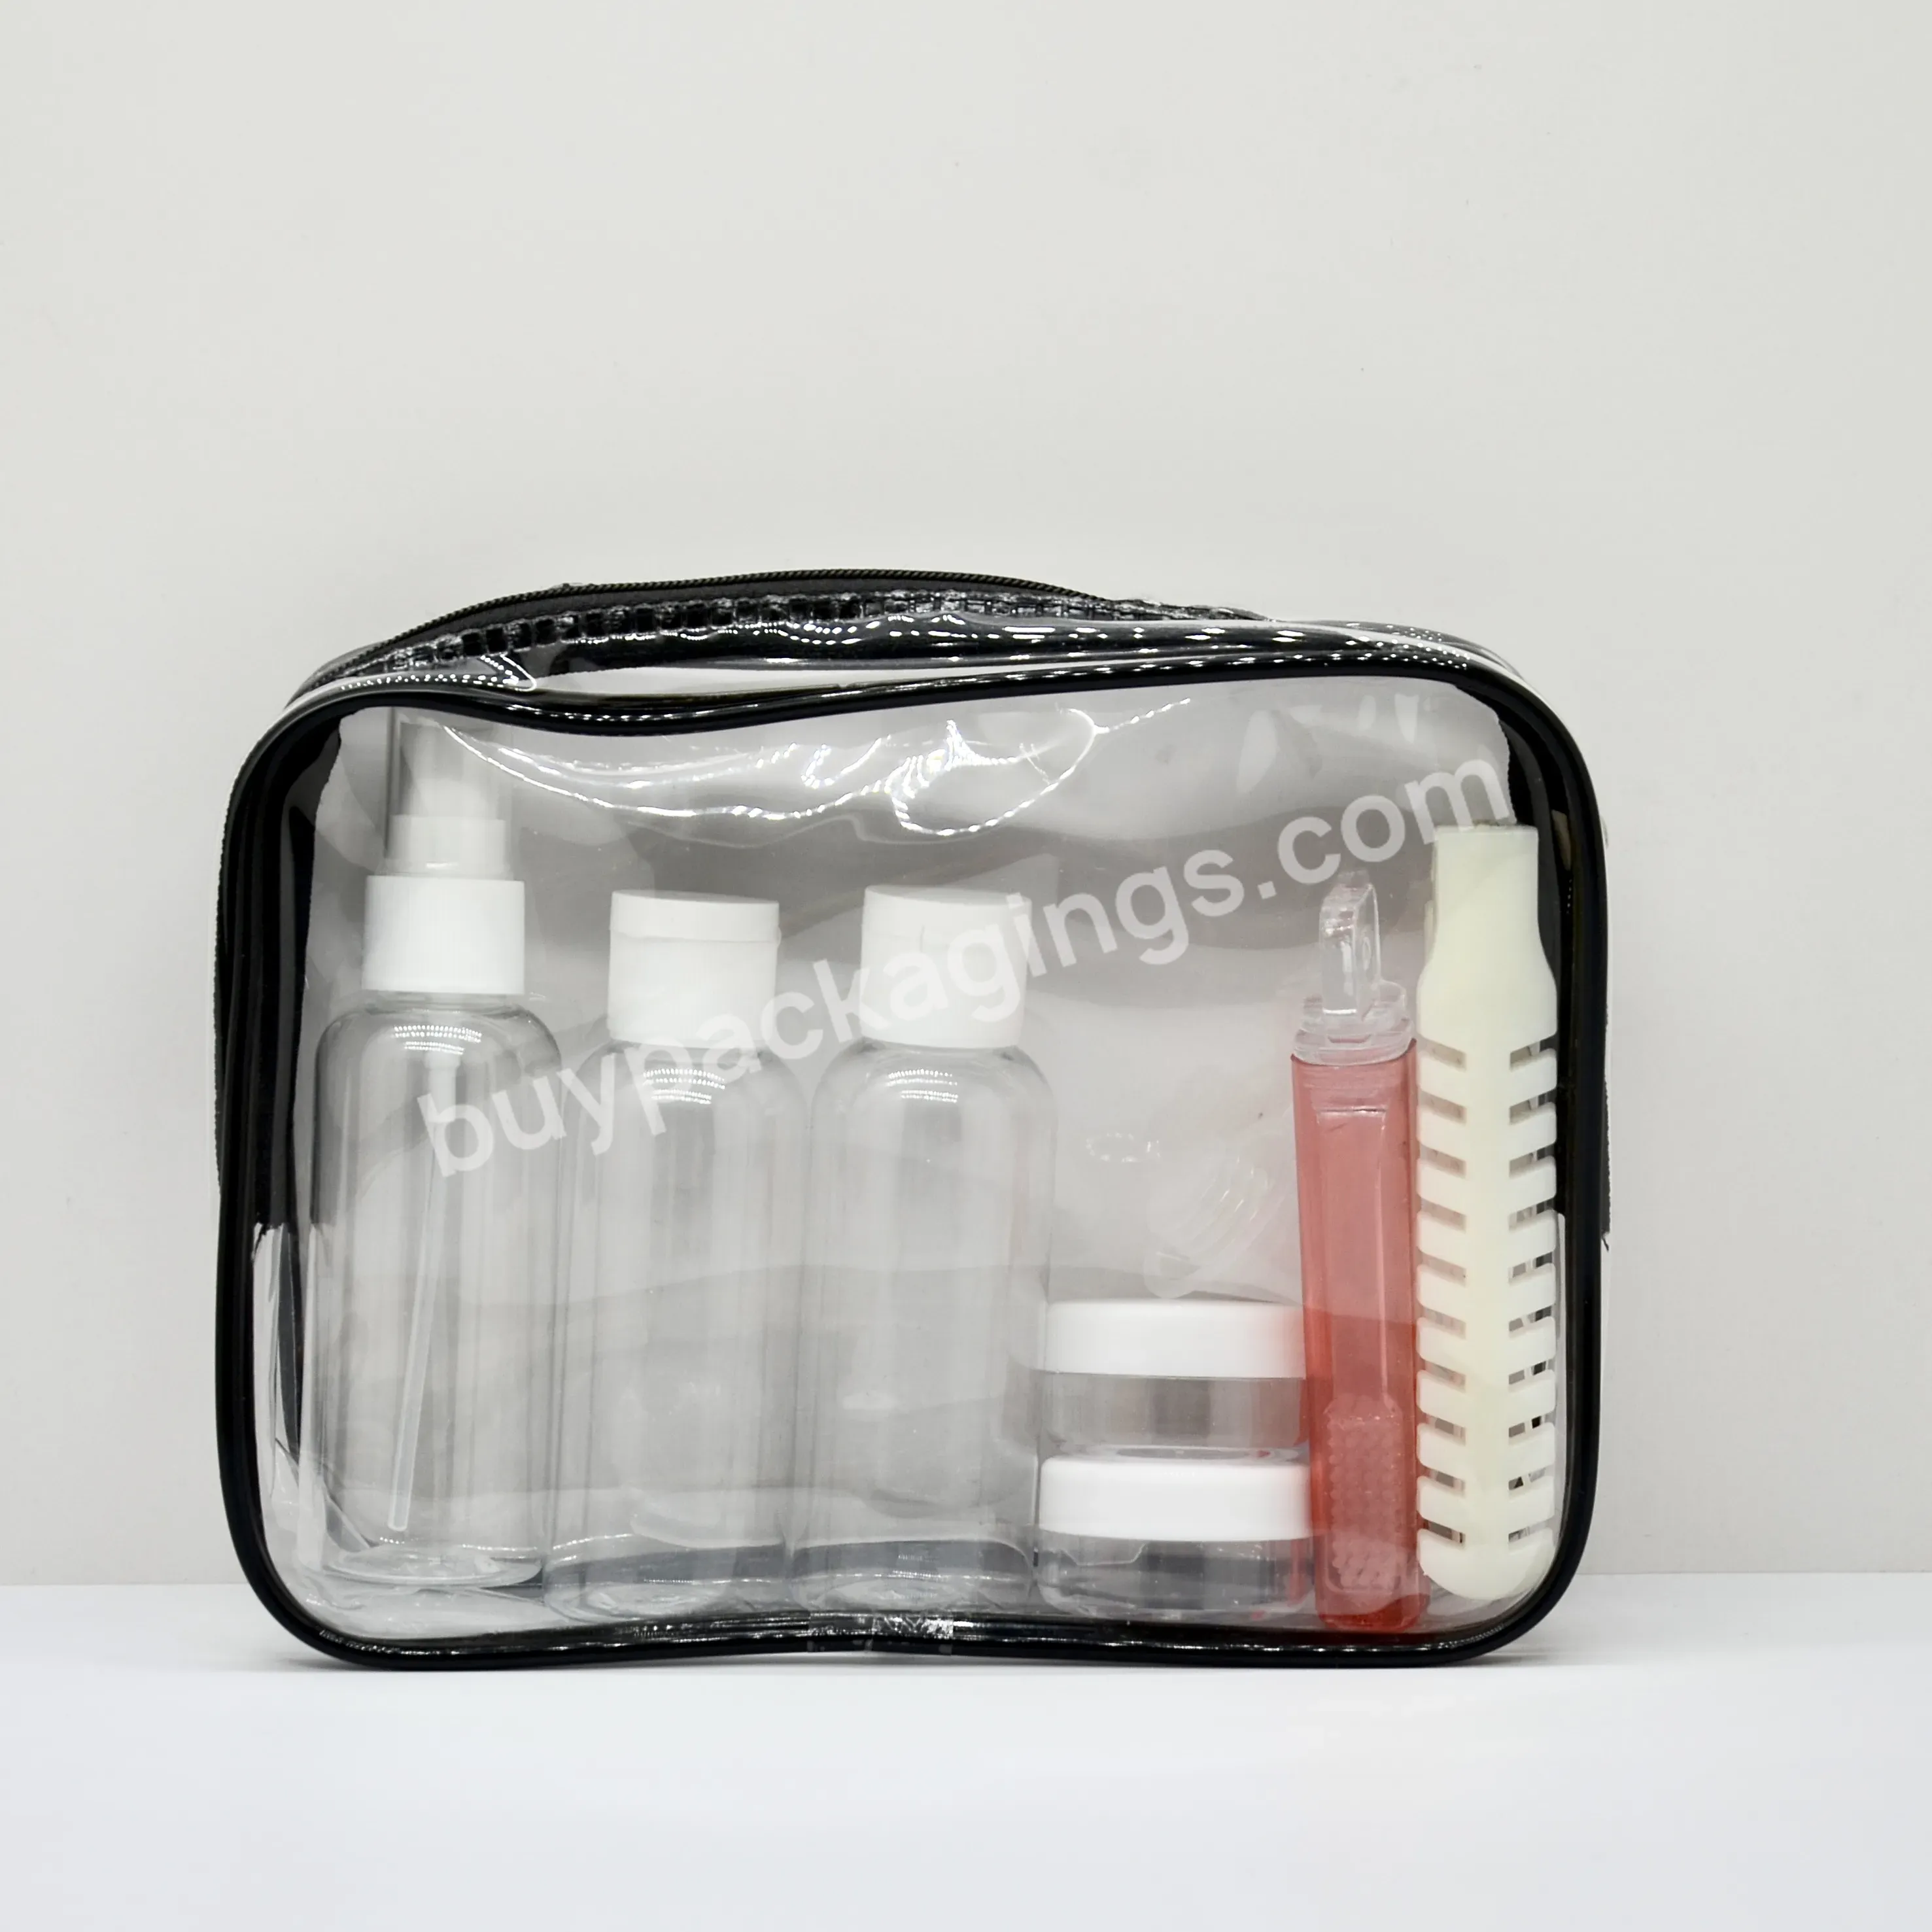 Leak-proof Toiletry Containers Cosmetic Travel Cosmetic Packing Bottle Custom Plastic Travel Bottles With Toothbrush And Comb - Buy Custom Travel Bottle Set,Travel Cosmetic Packing,Travel Bottles With Toothbrush And Comb.